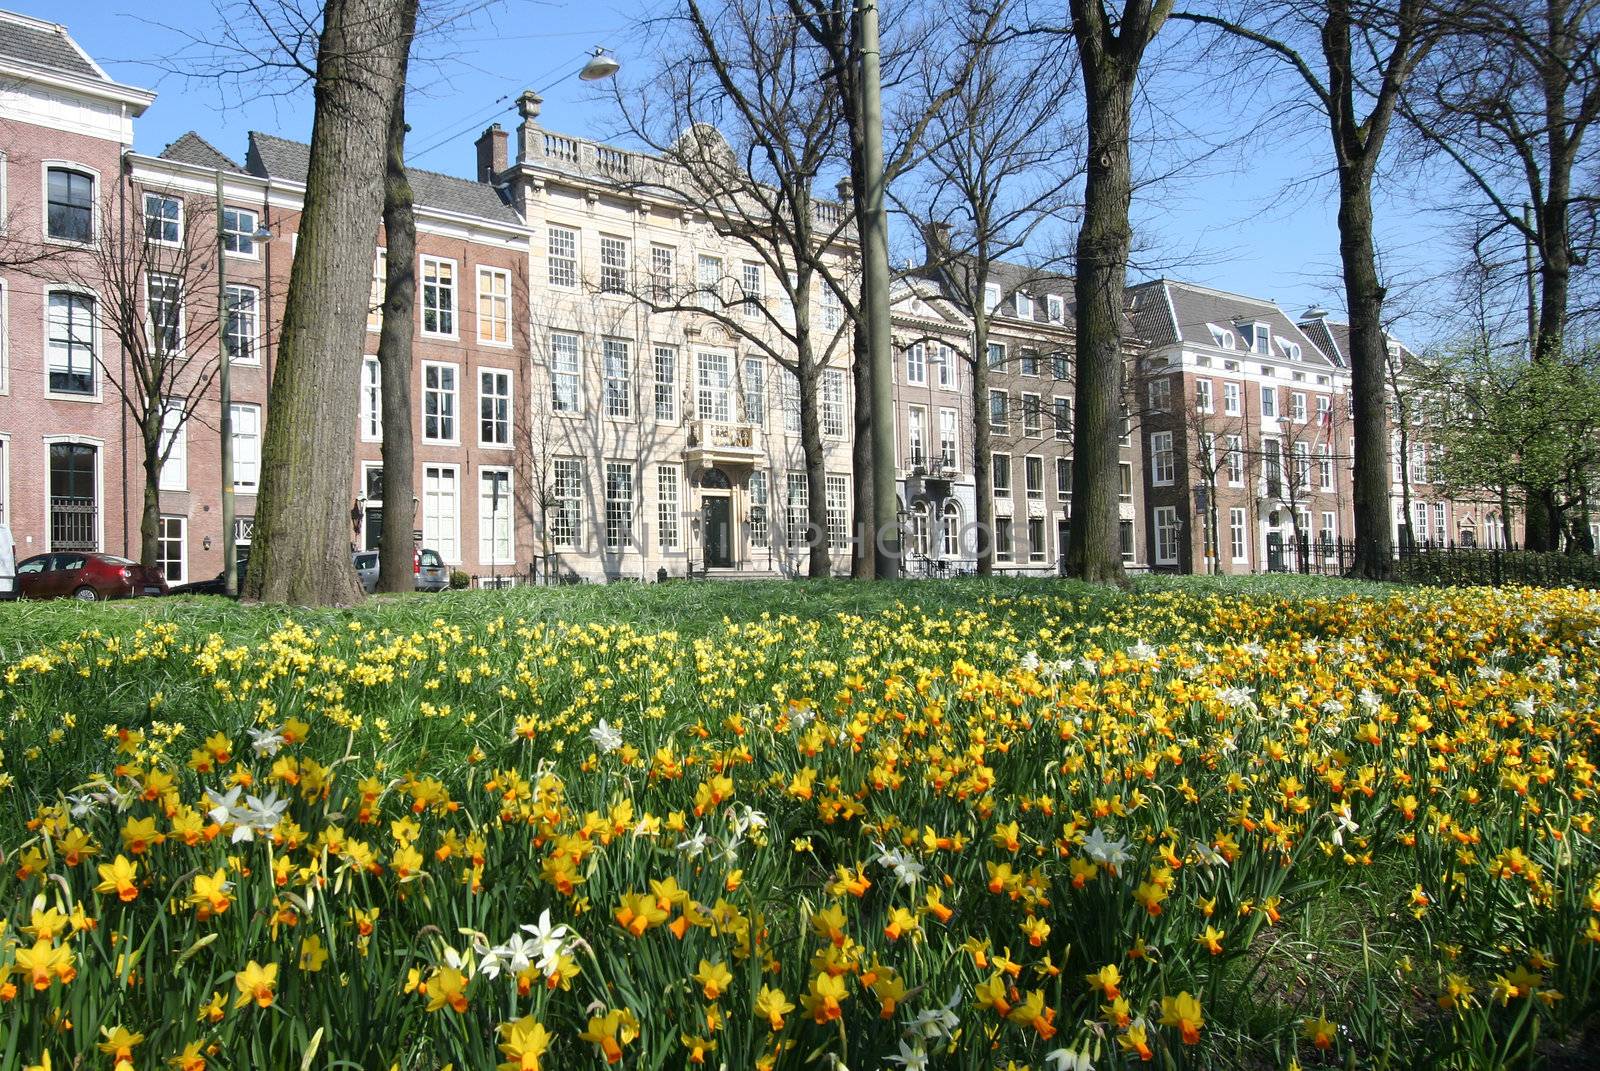 Spring flowers in The Hague